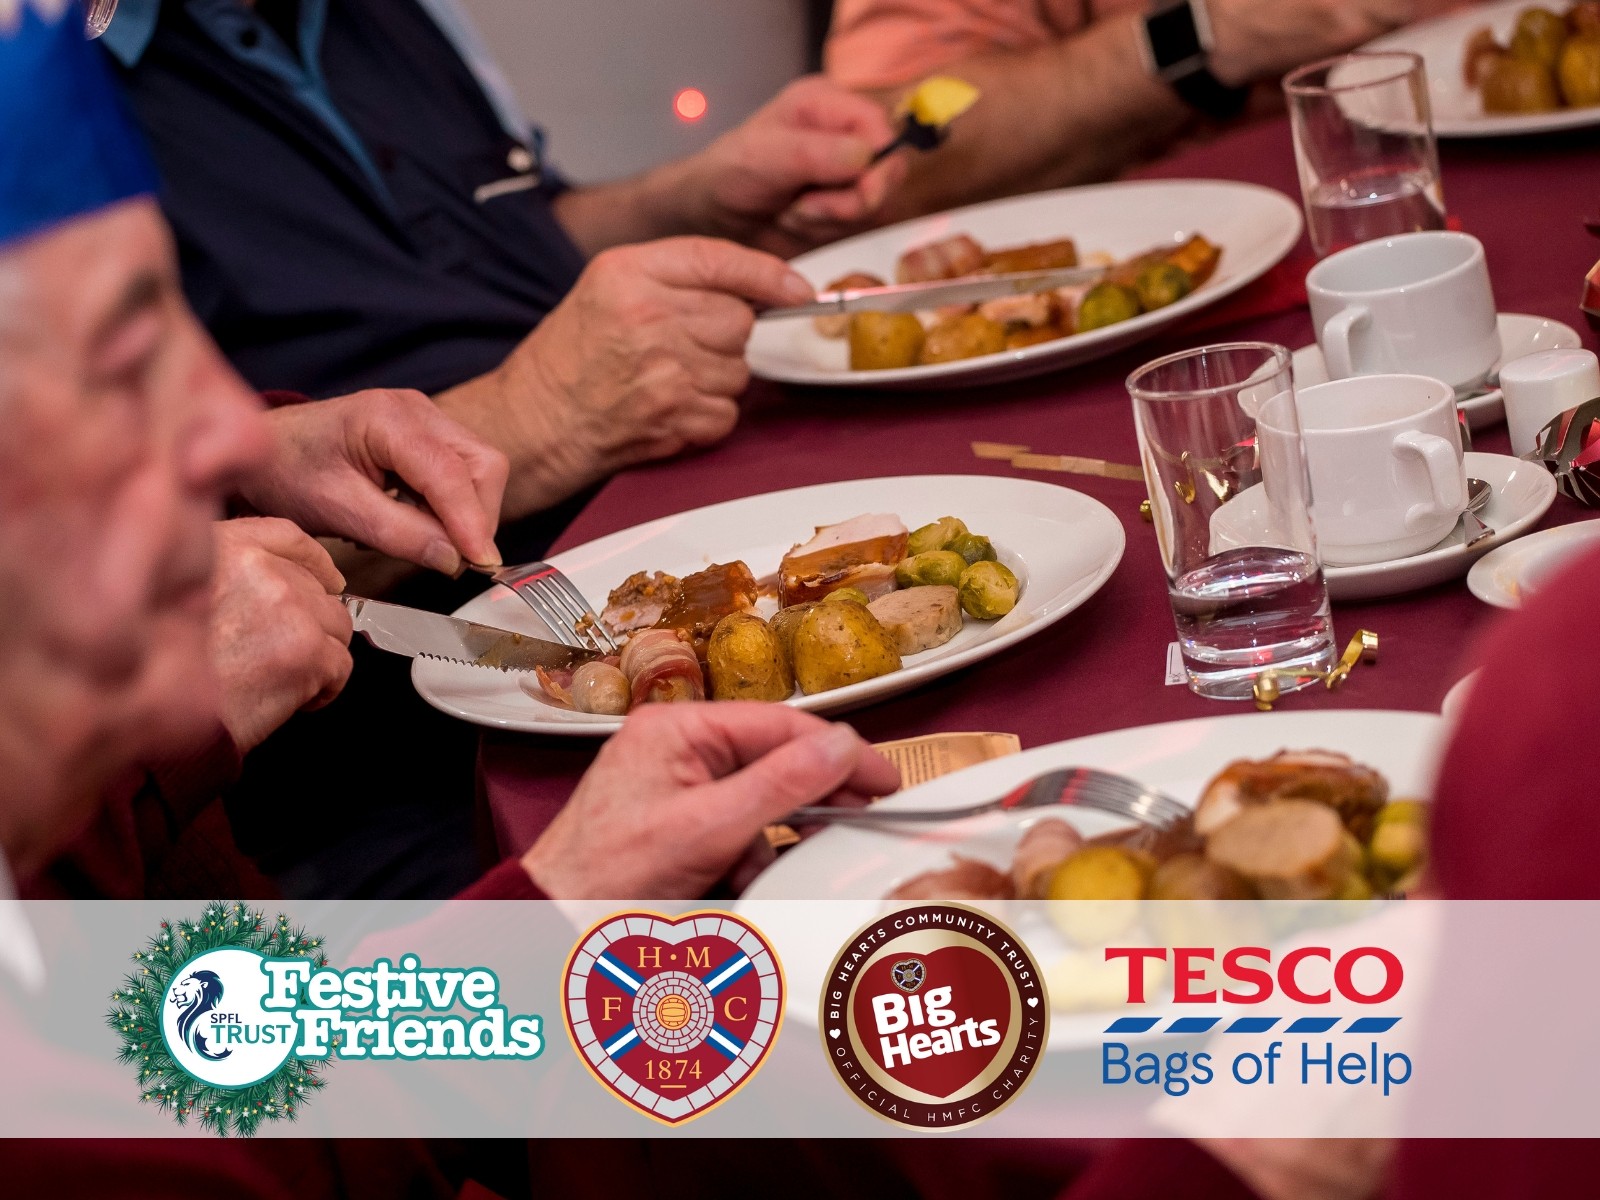  » Christmas Day Cheer: 100 to enjoy free festive meal with Big Hearts